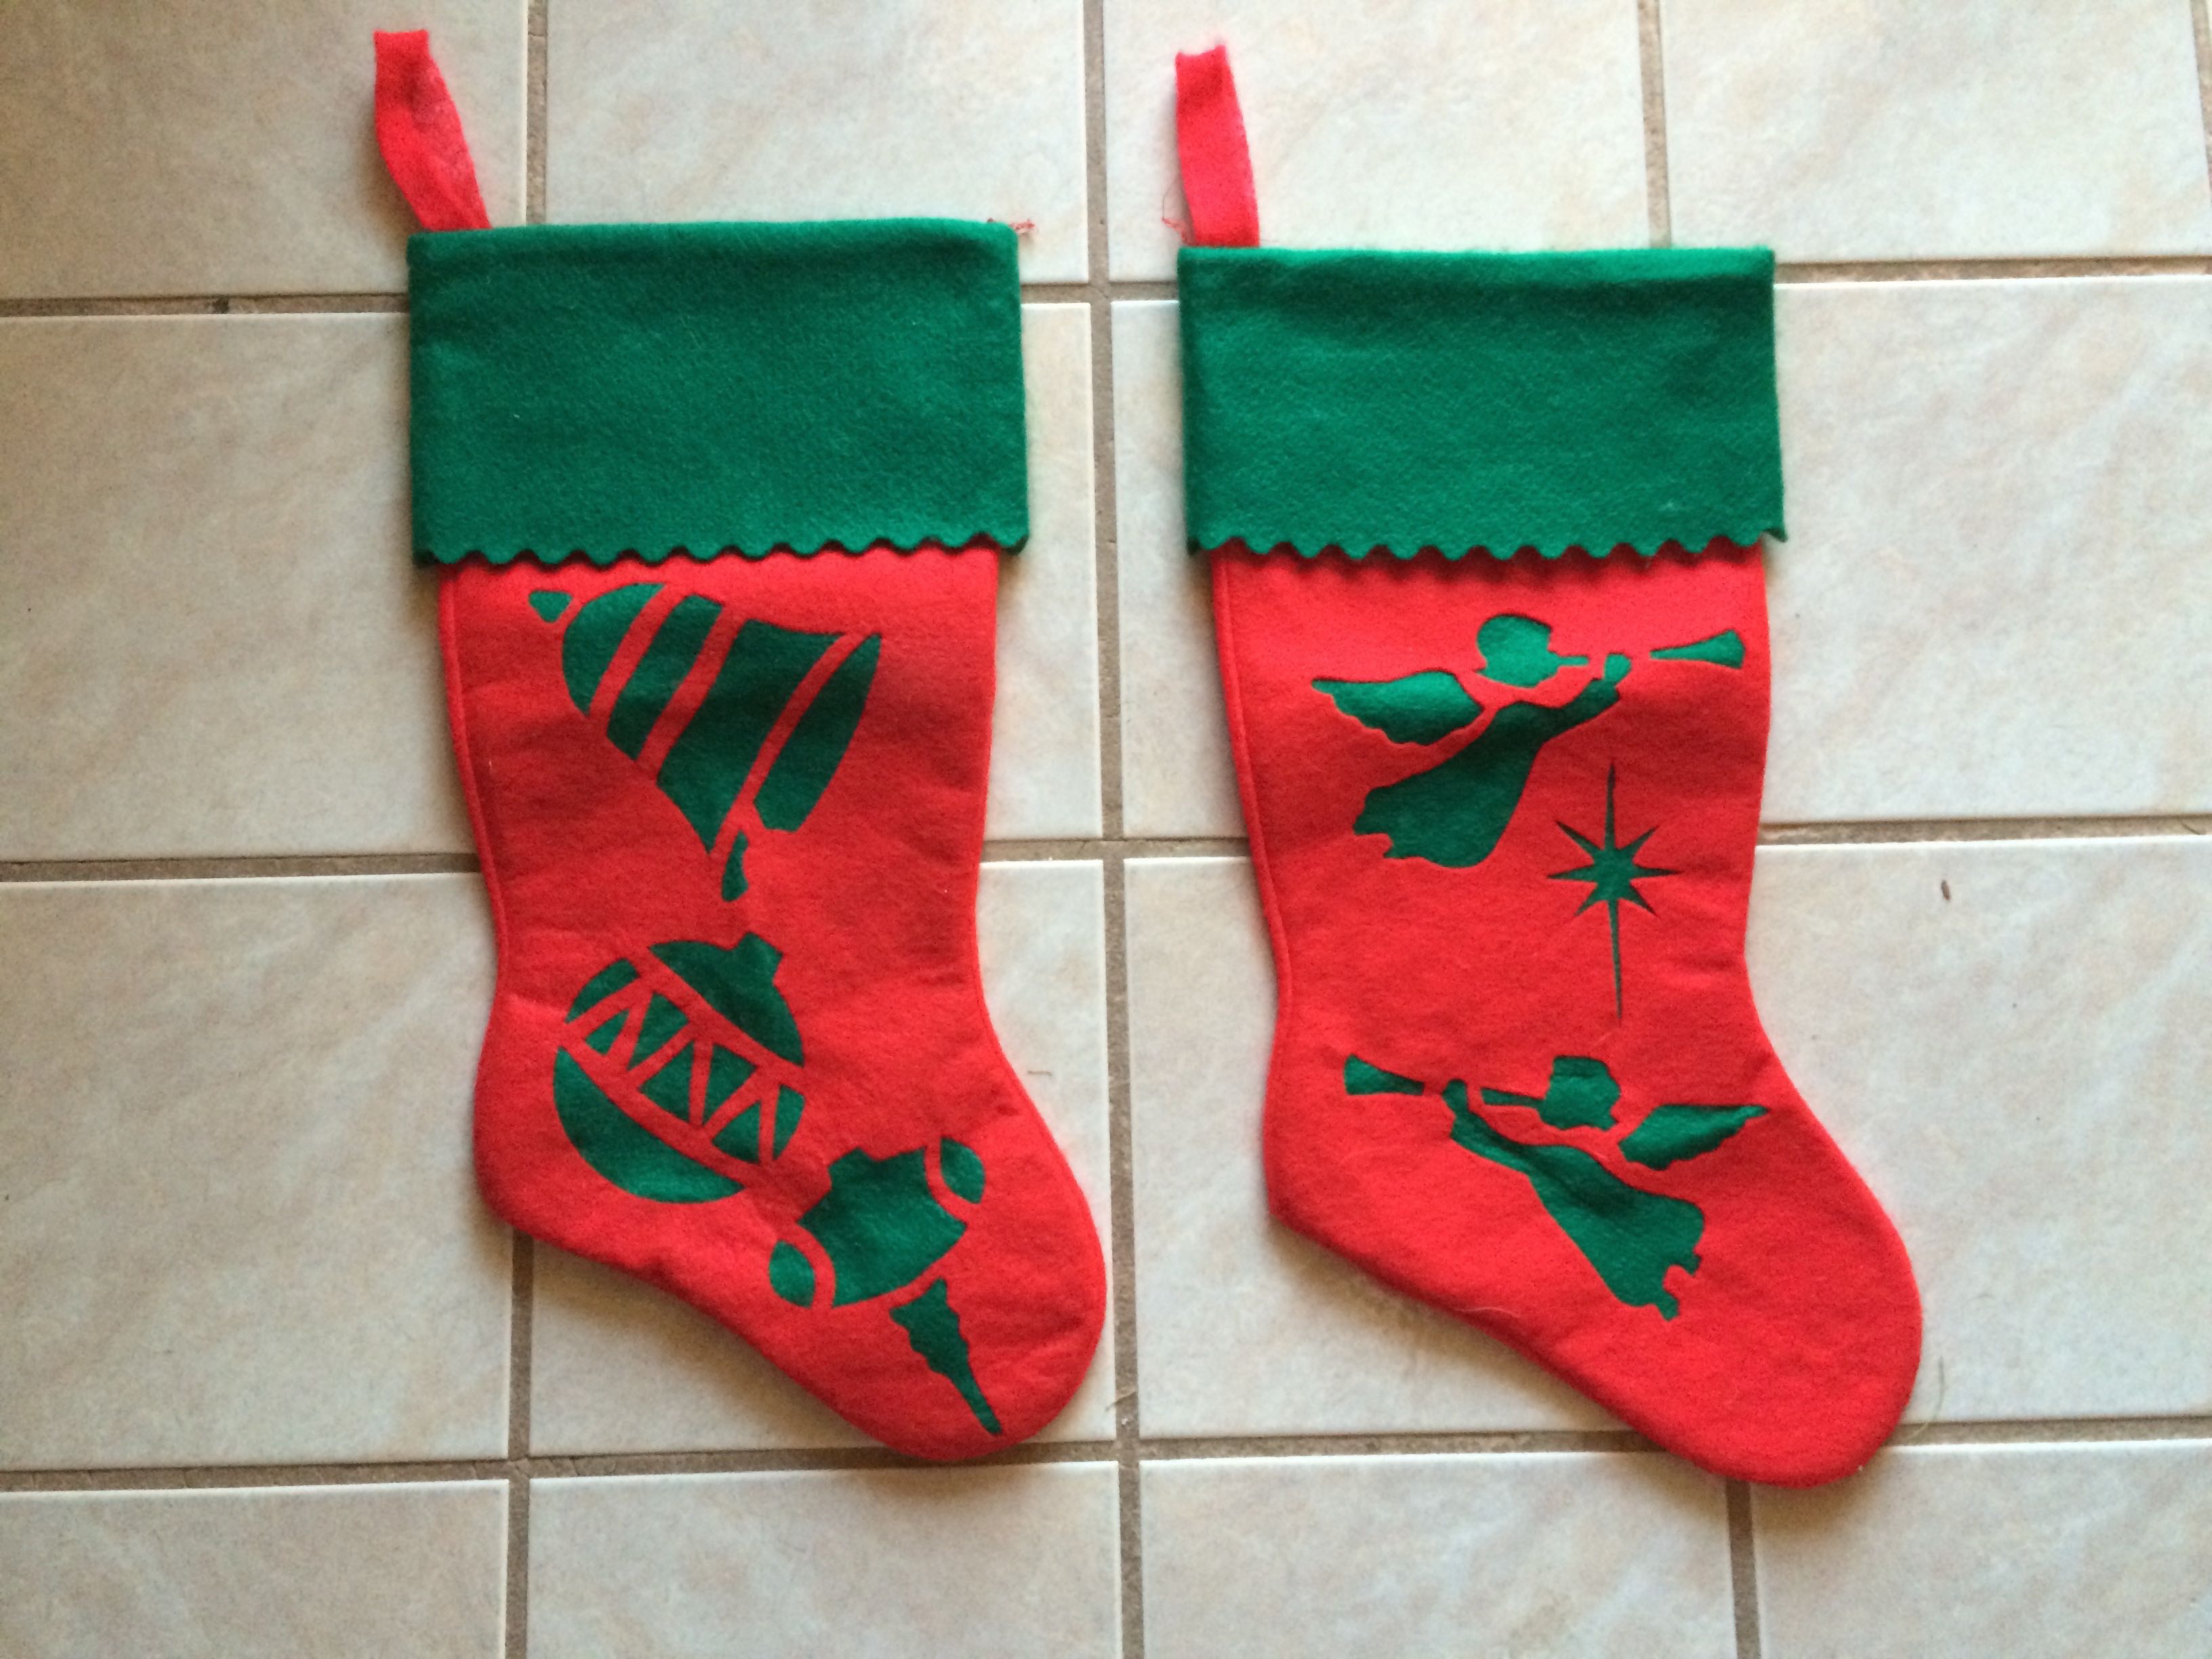 Vintage 1964 Felt Cutwork Christmas Stockings by Annabelle\'s Angels (set of 2)